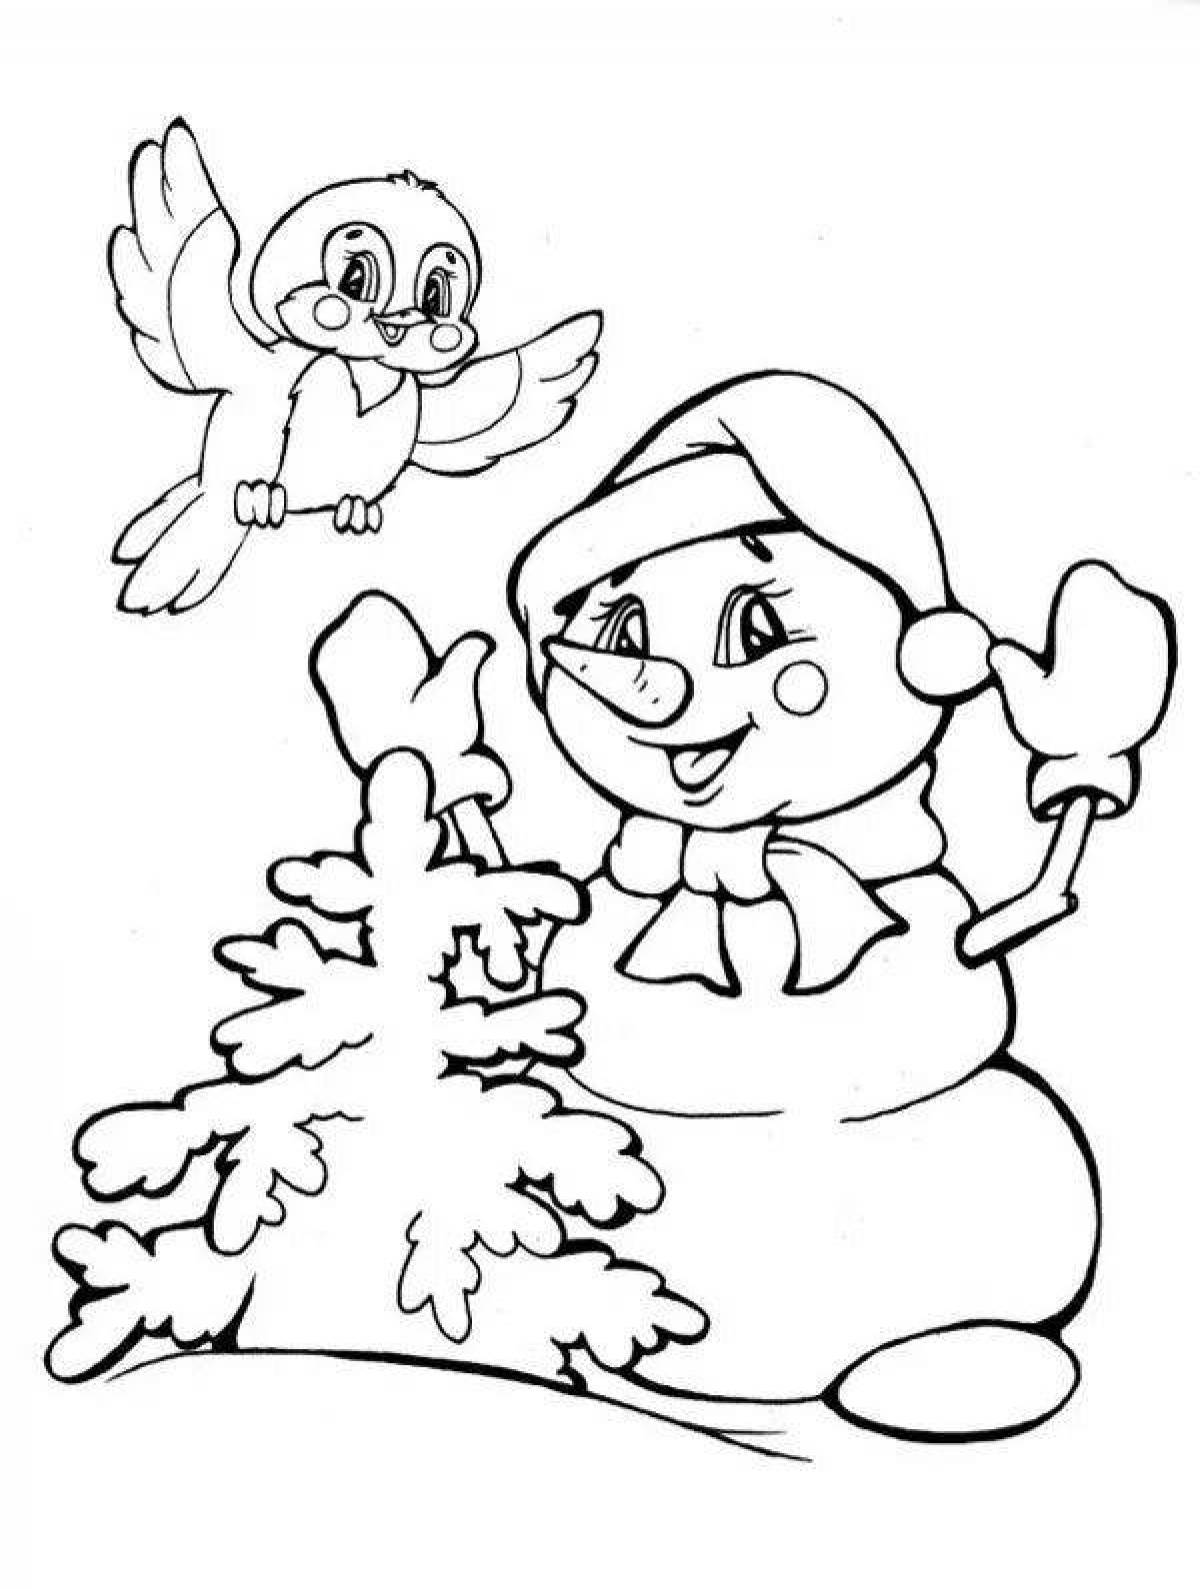 Exquisite Christmas tree and rabbit coloring book